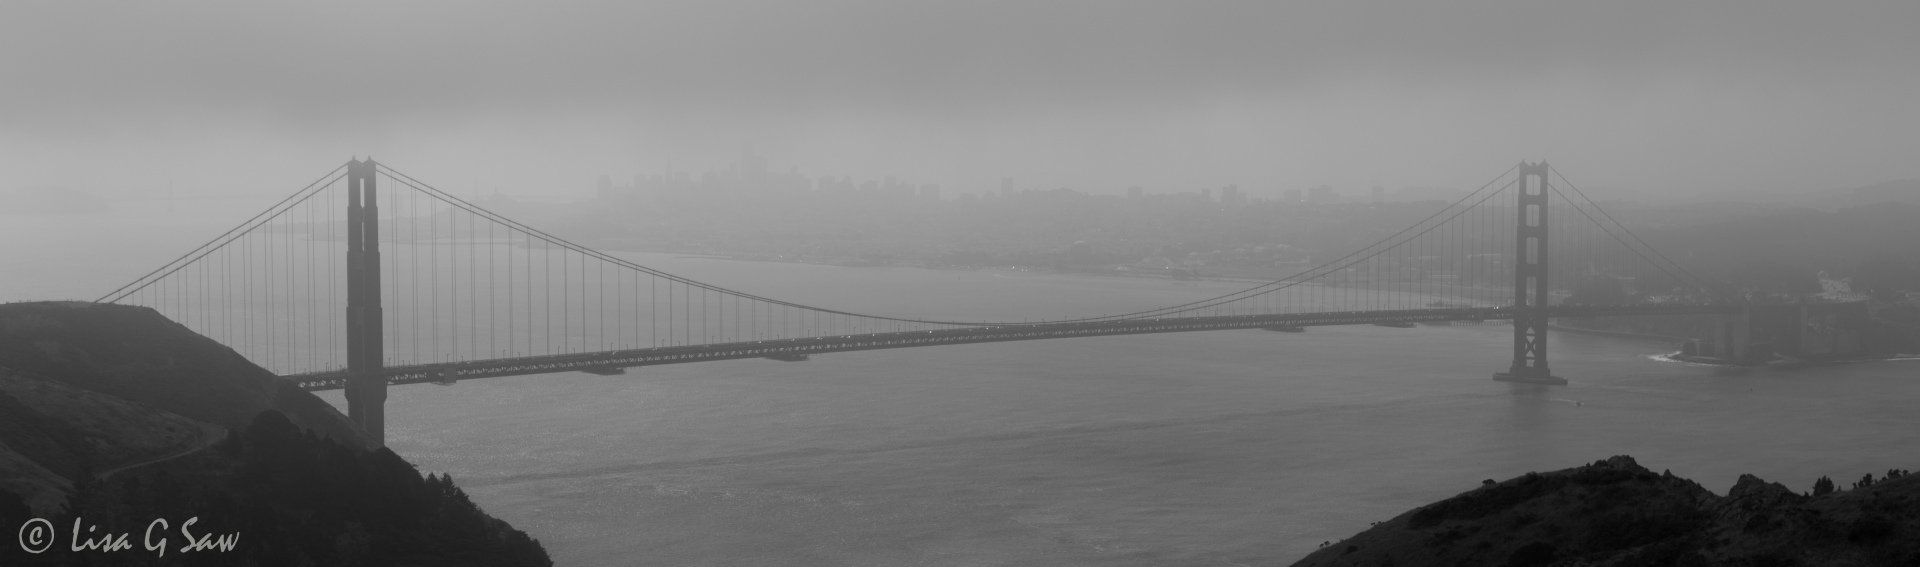 Golden Gate Bridge and city beyond in mist (black and white) (black and white)